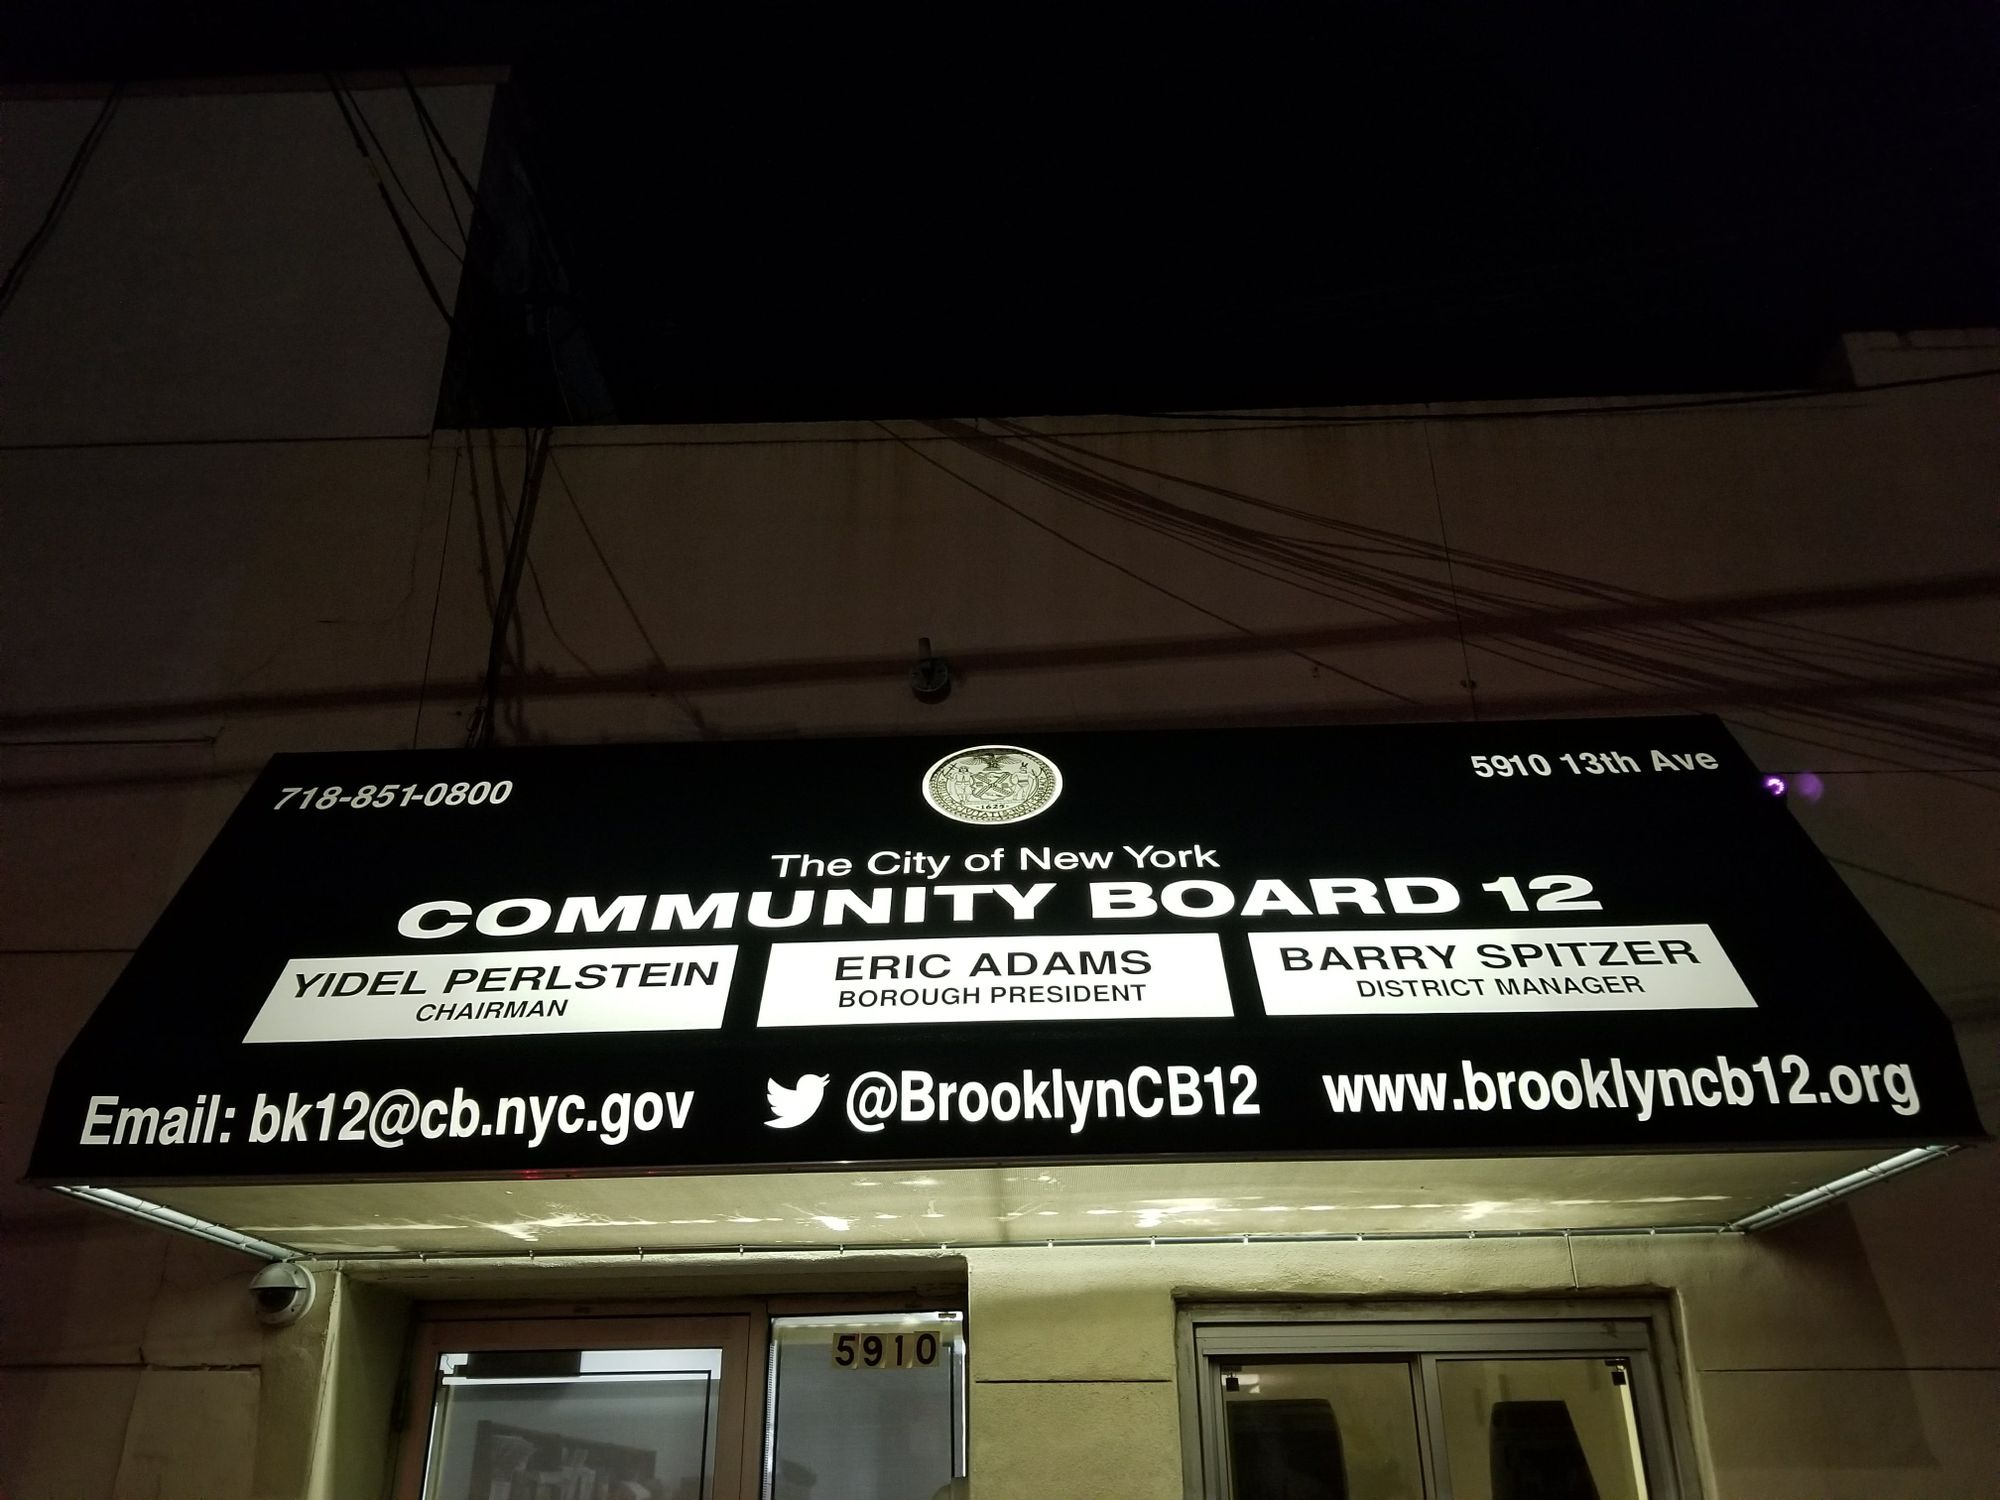 “Arbitrary, Capricious and Downright Unfair:” Brooklyn Community Boards Push Back on Budget Cuts